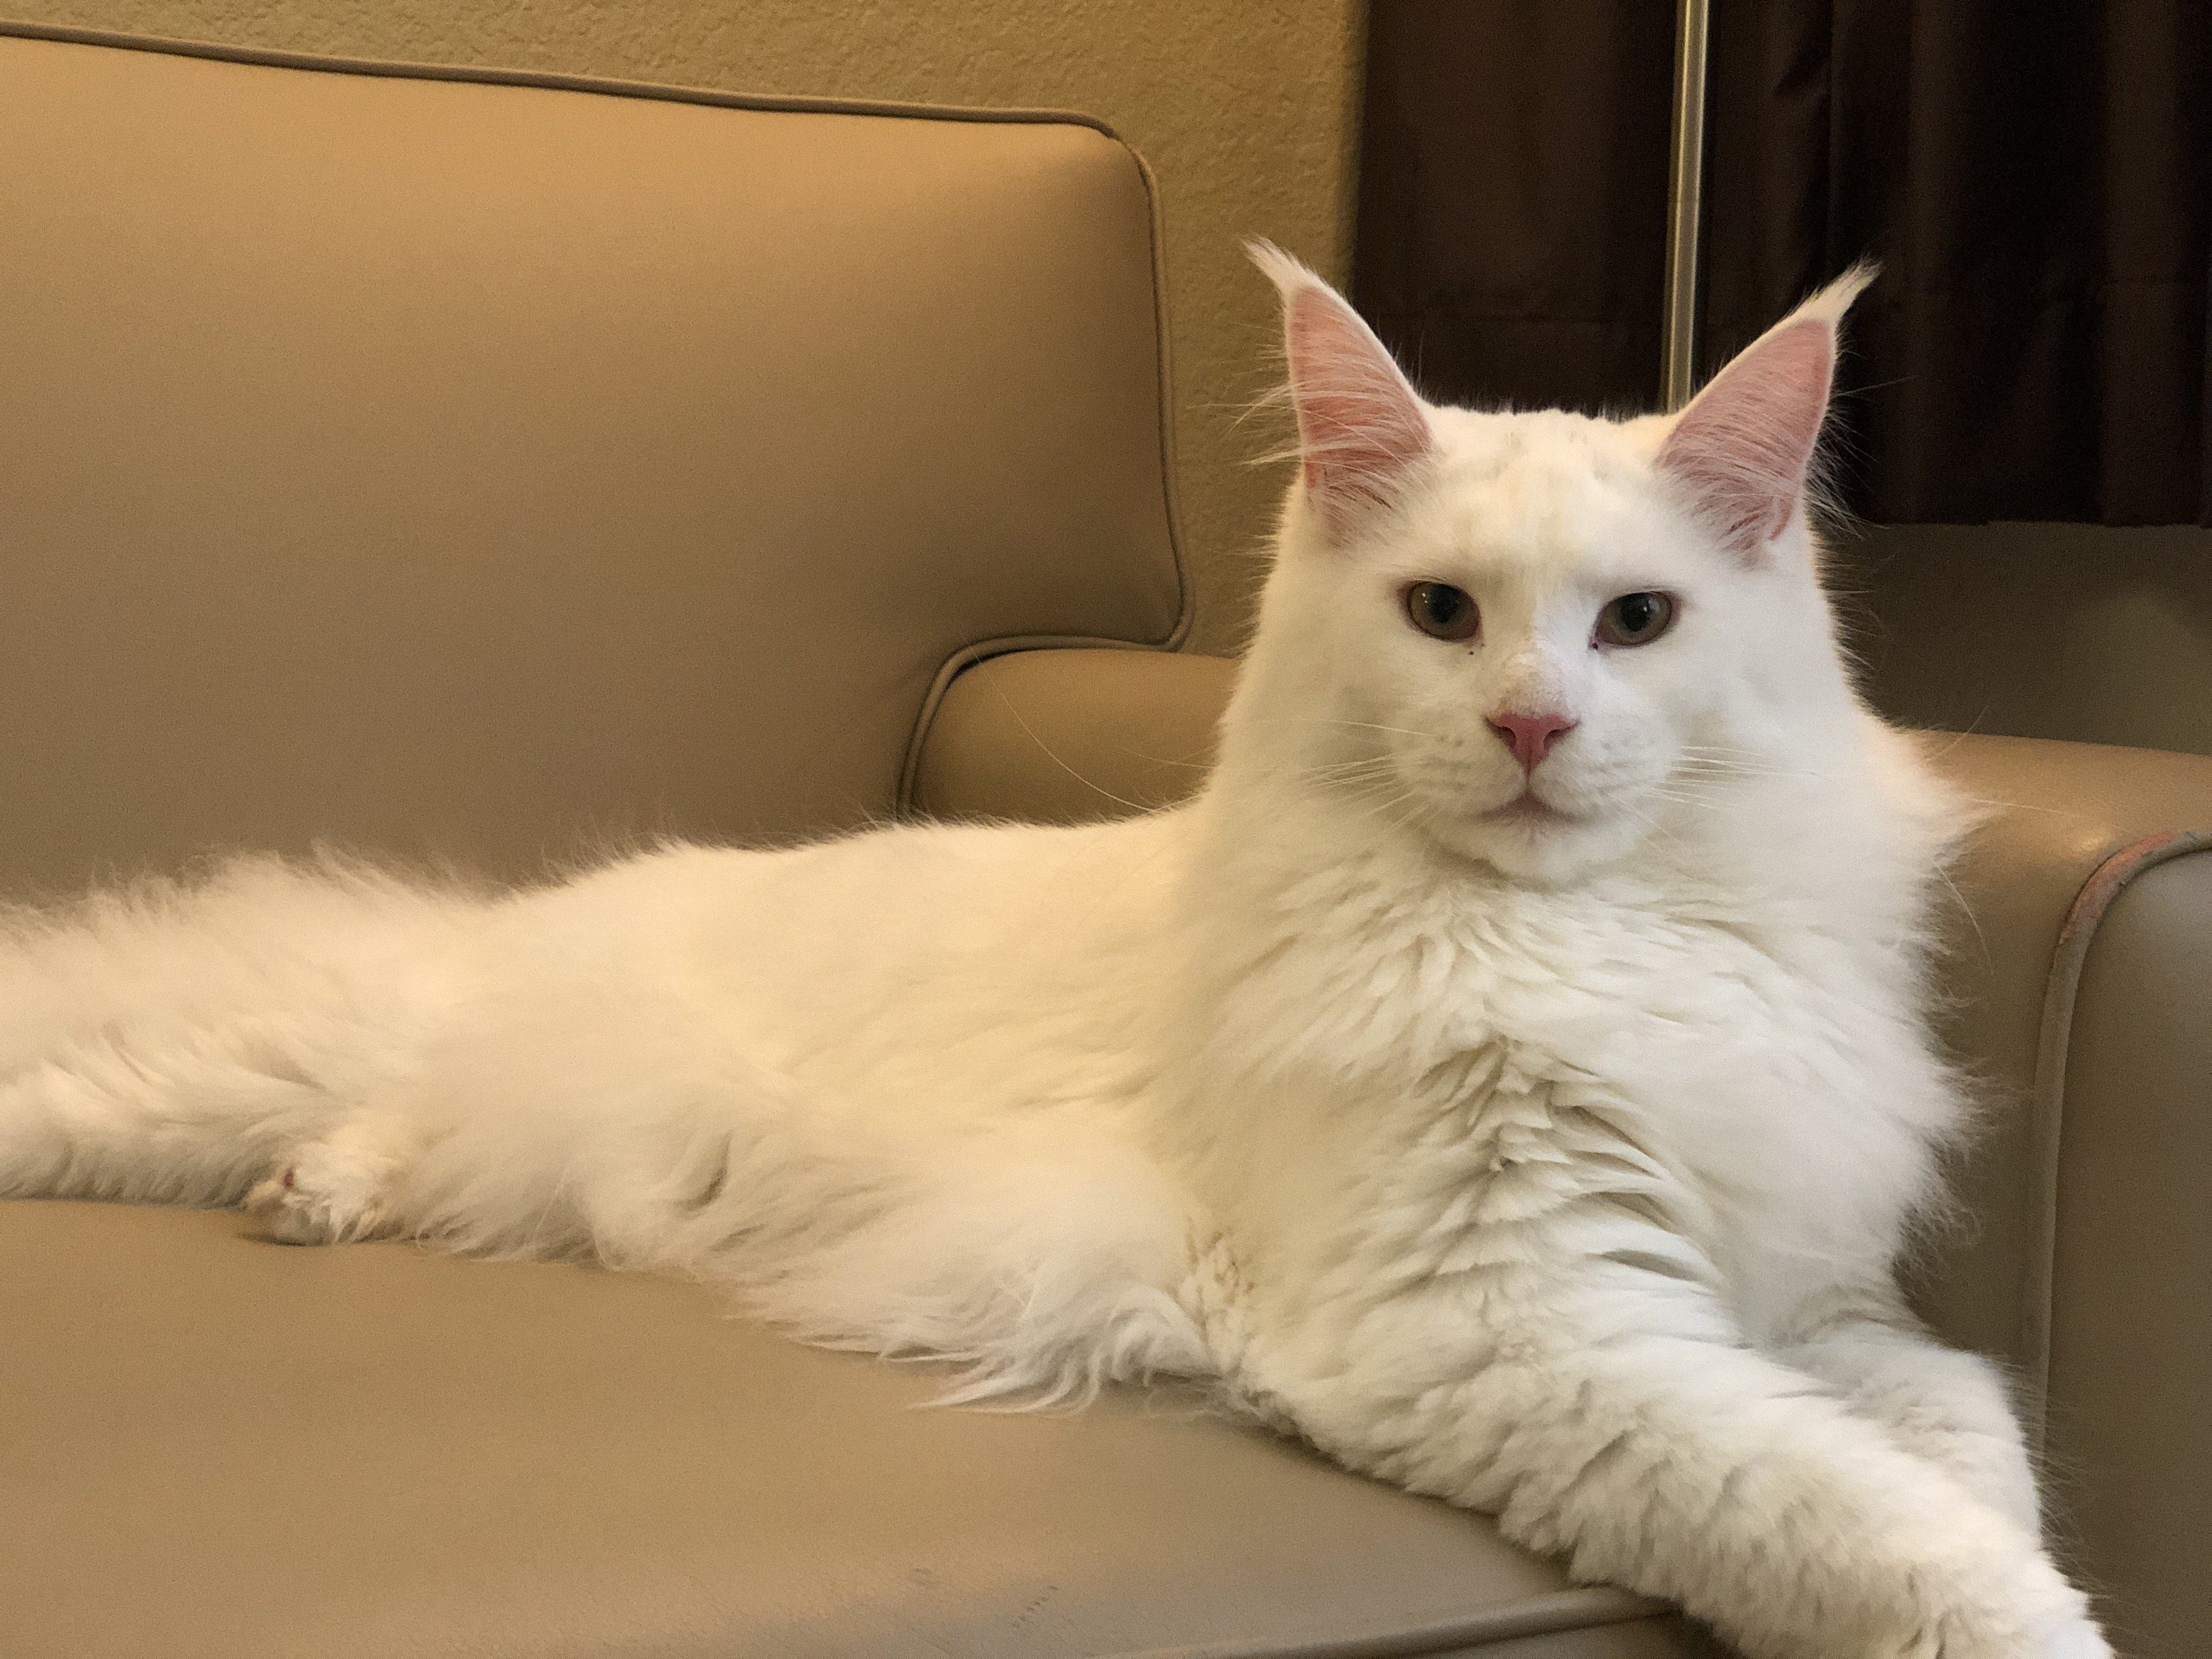 White Maine Coon - This Could Be The Coolest One Ever